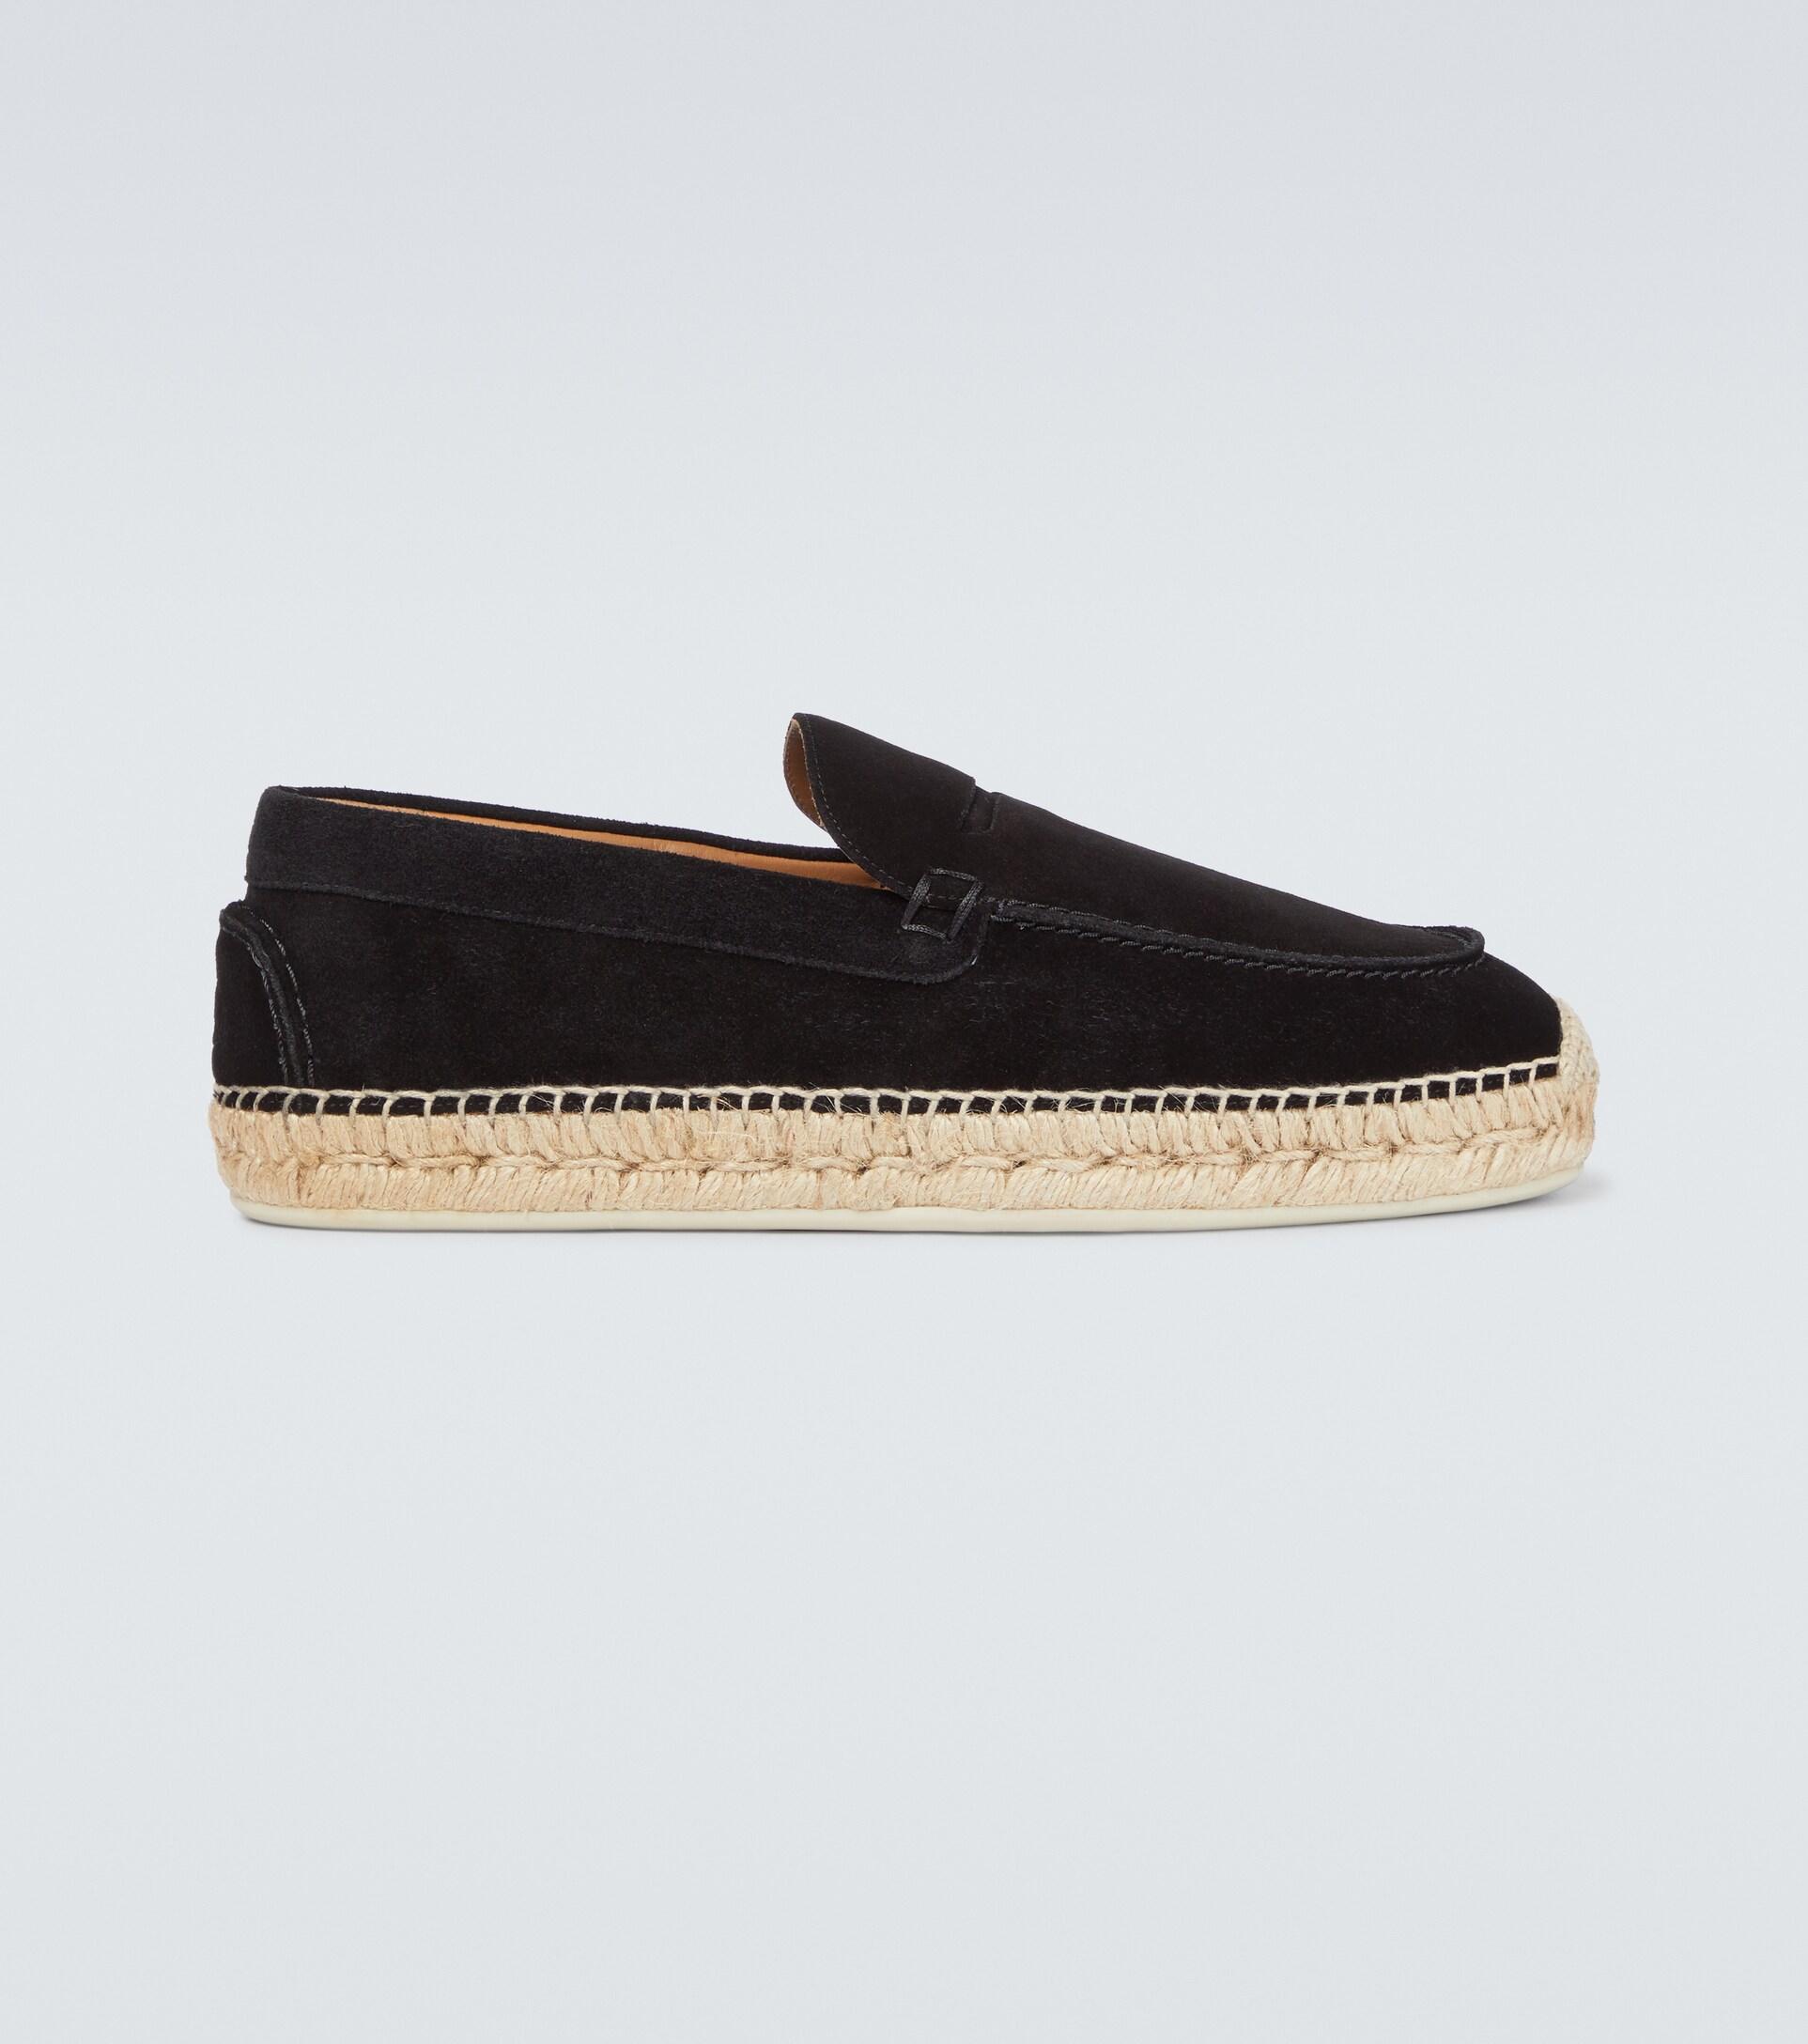 Mens Shoes Slip-on shoes Espadrille shoes and sandals Christian Louboutin Suede Paquepapa Espadrilles in Black for Men 